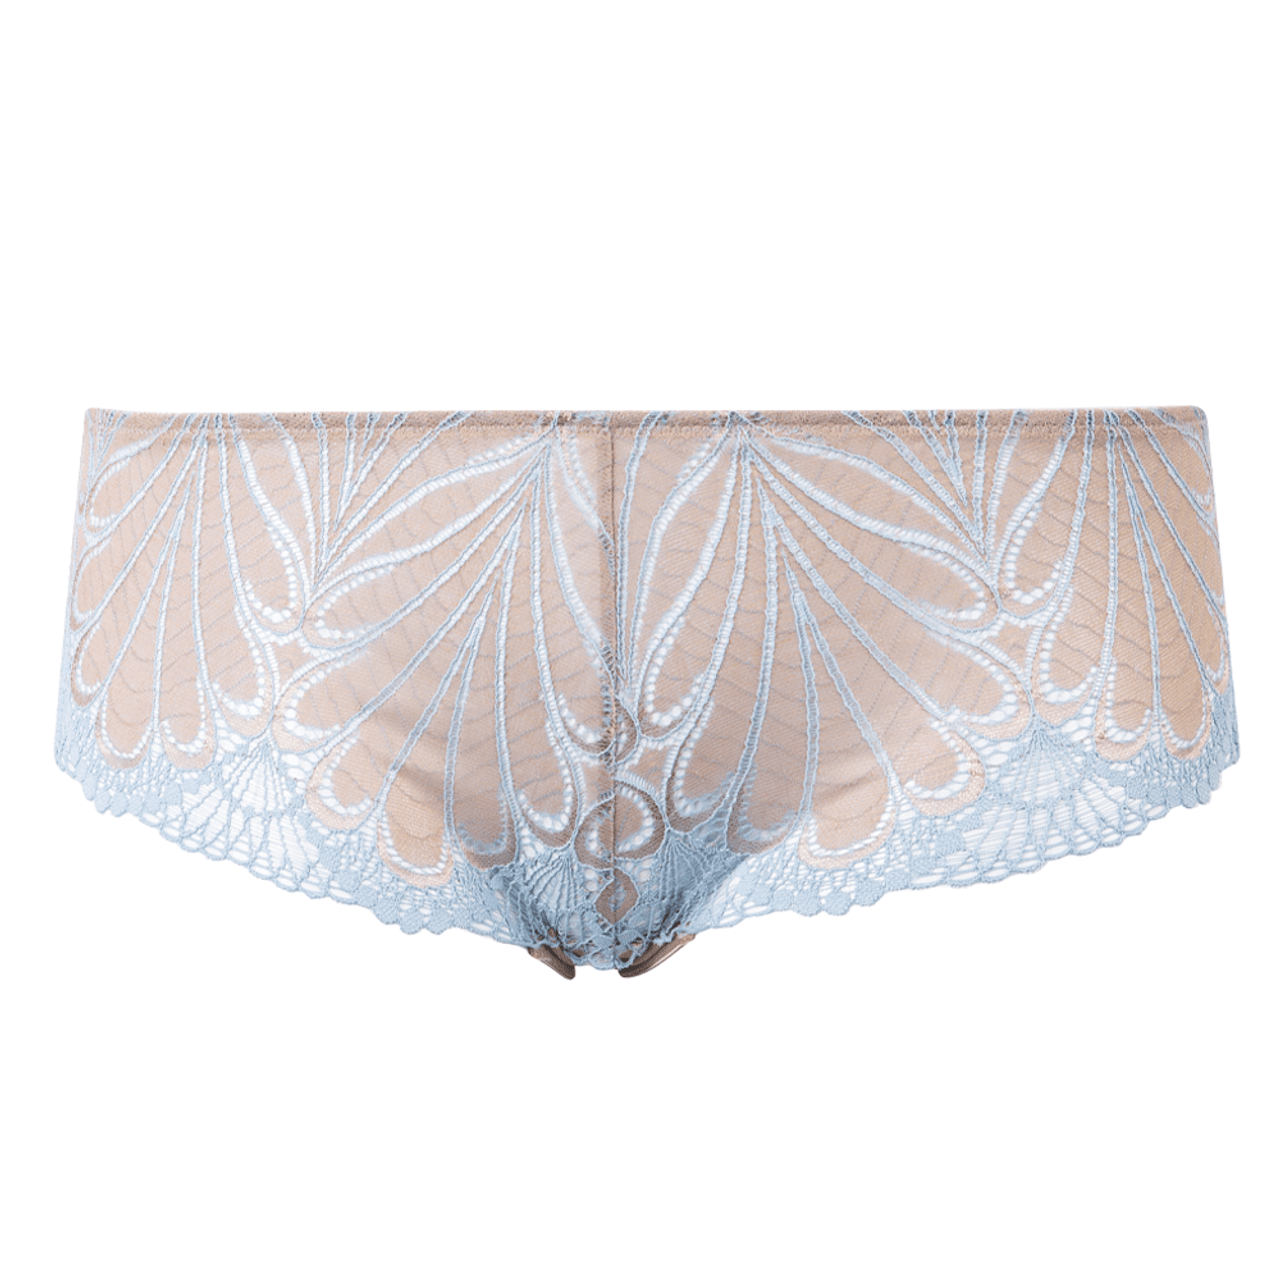 Wonderbra Refined Glamour Lace Brief - Ivory